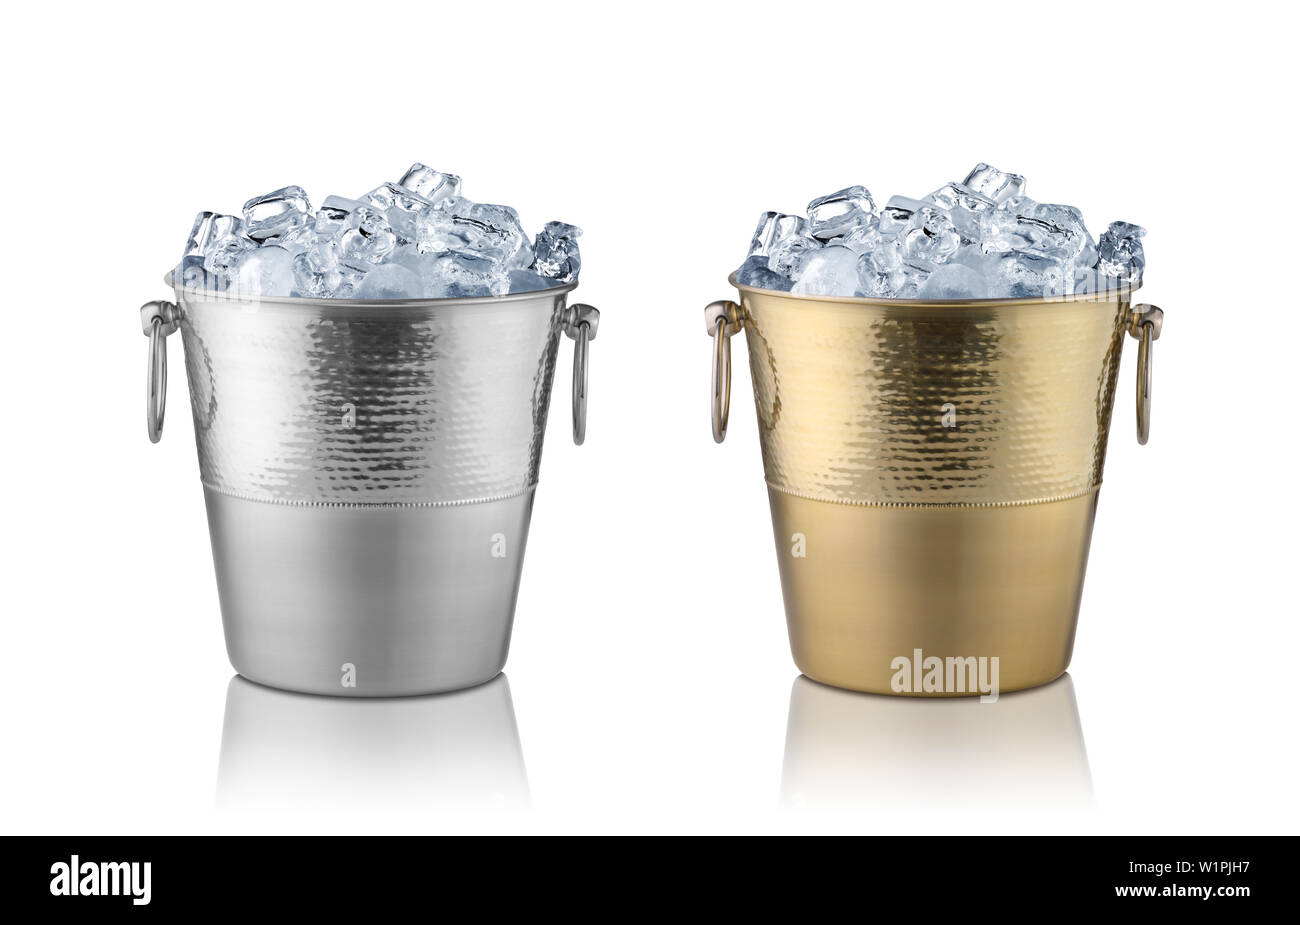 Champagne buckets, full with ice. Isolated on white Stock Photo